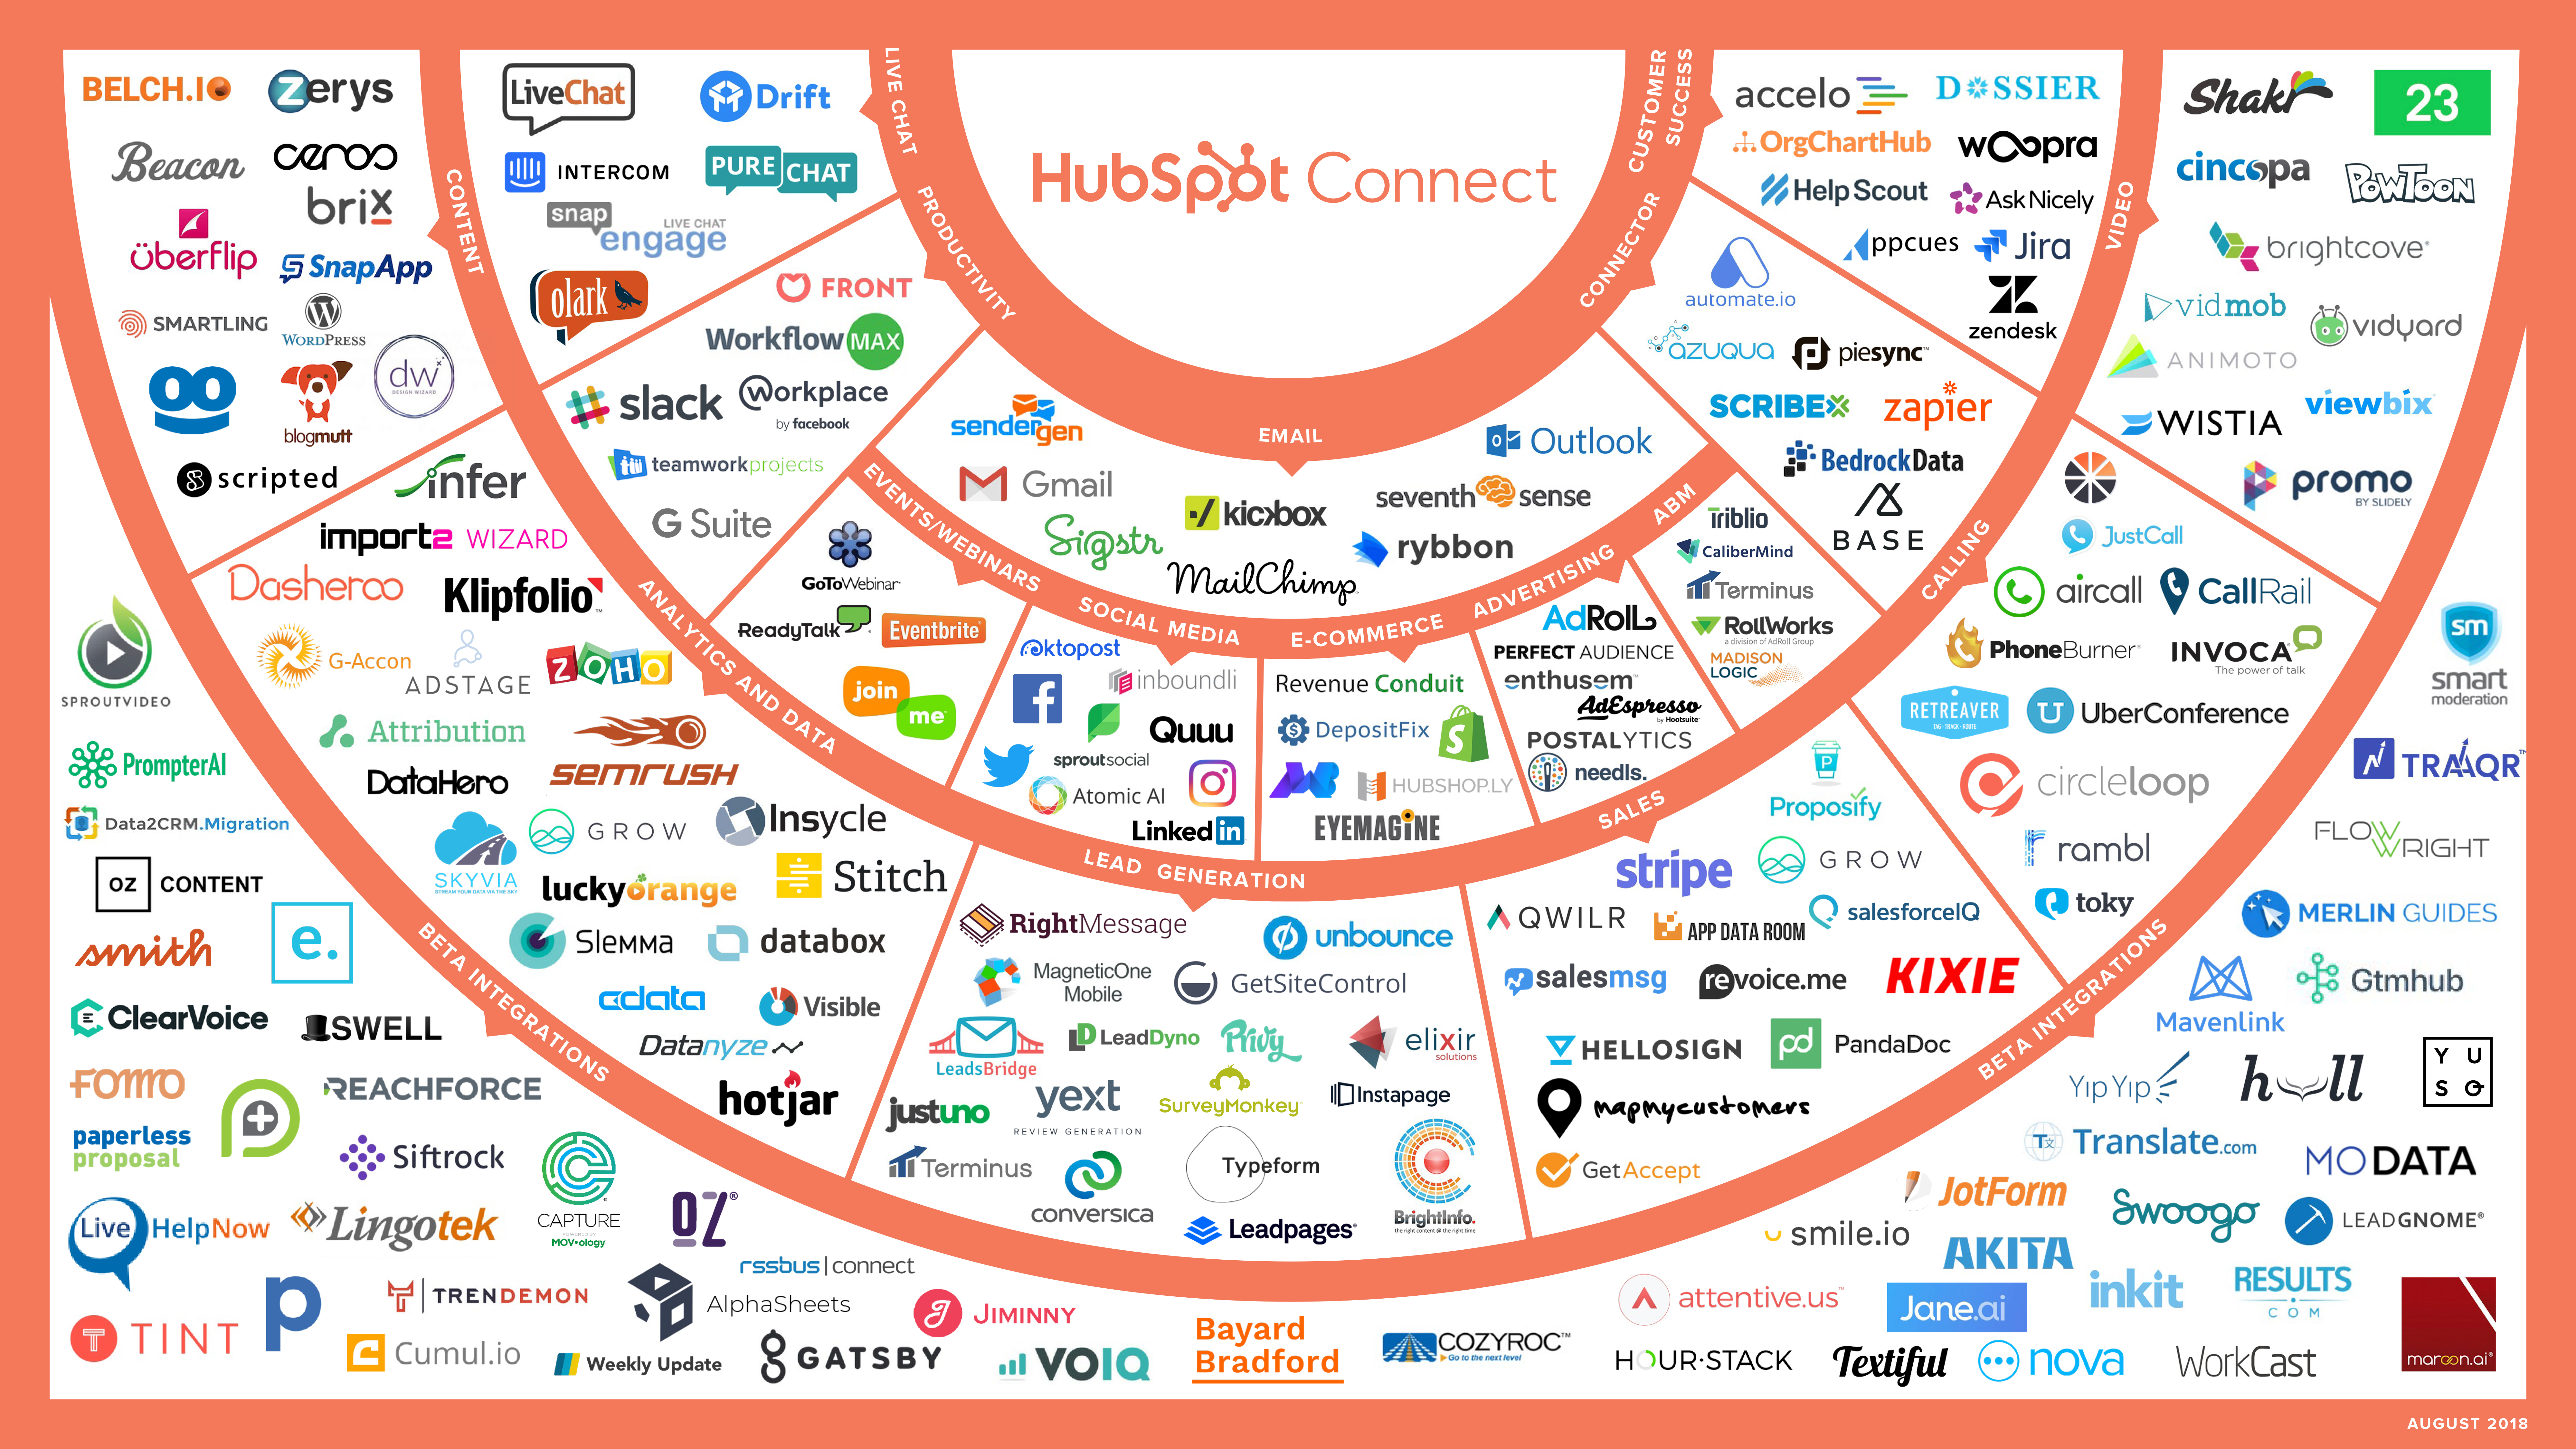 January 2019: New HubSpot Product Integrations This Month